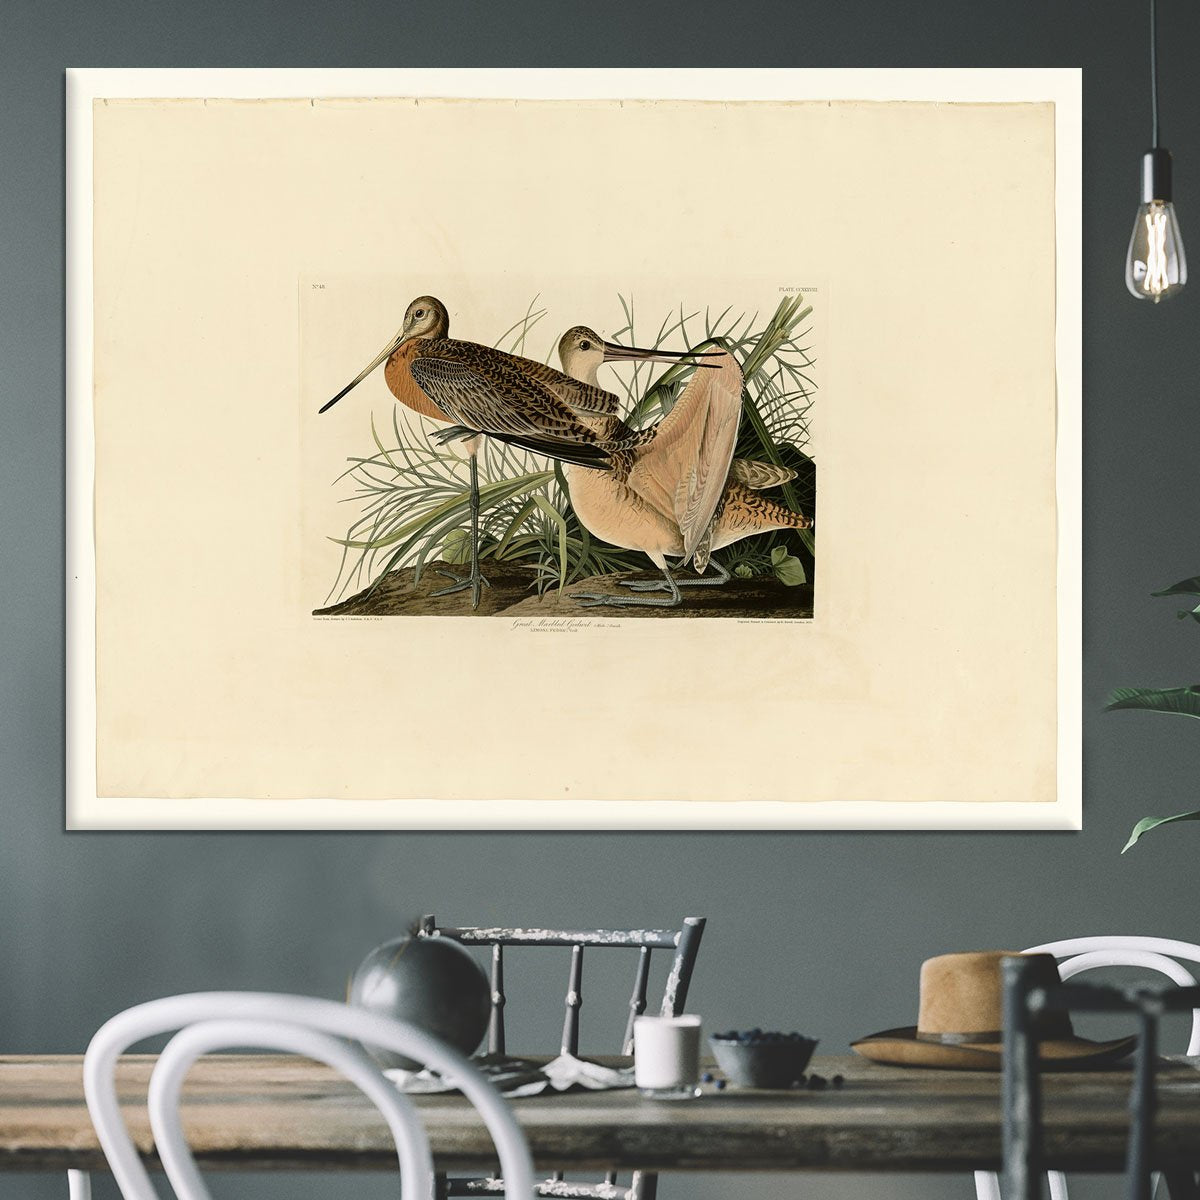 Great Marbled Godwit by Audubon Canvas Print or Poster